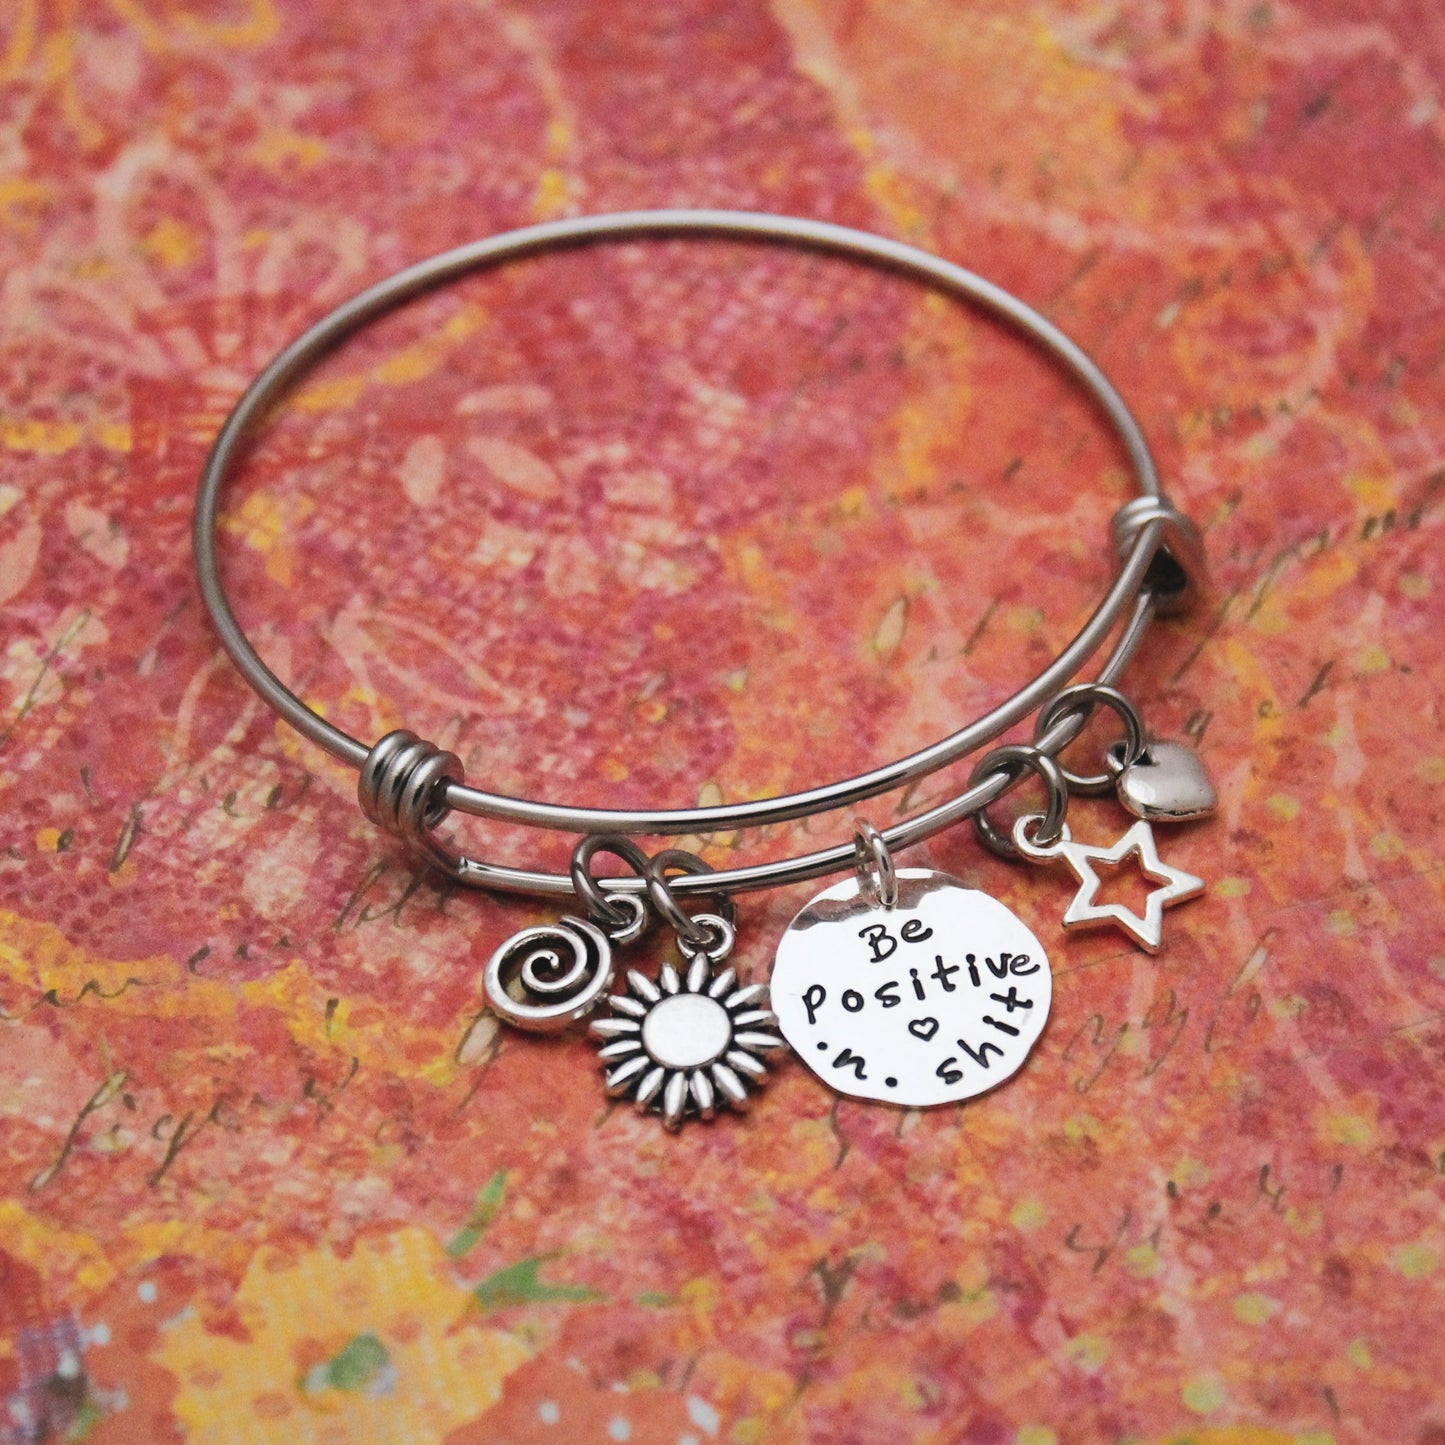 Be Positive n Shit Bracelet Bangle, Motivational Jewelry Bracelet, Curse Word Jewelry Bracelet Gift, Fun Hand Made Personalized Gift for Her